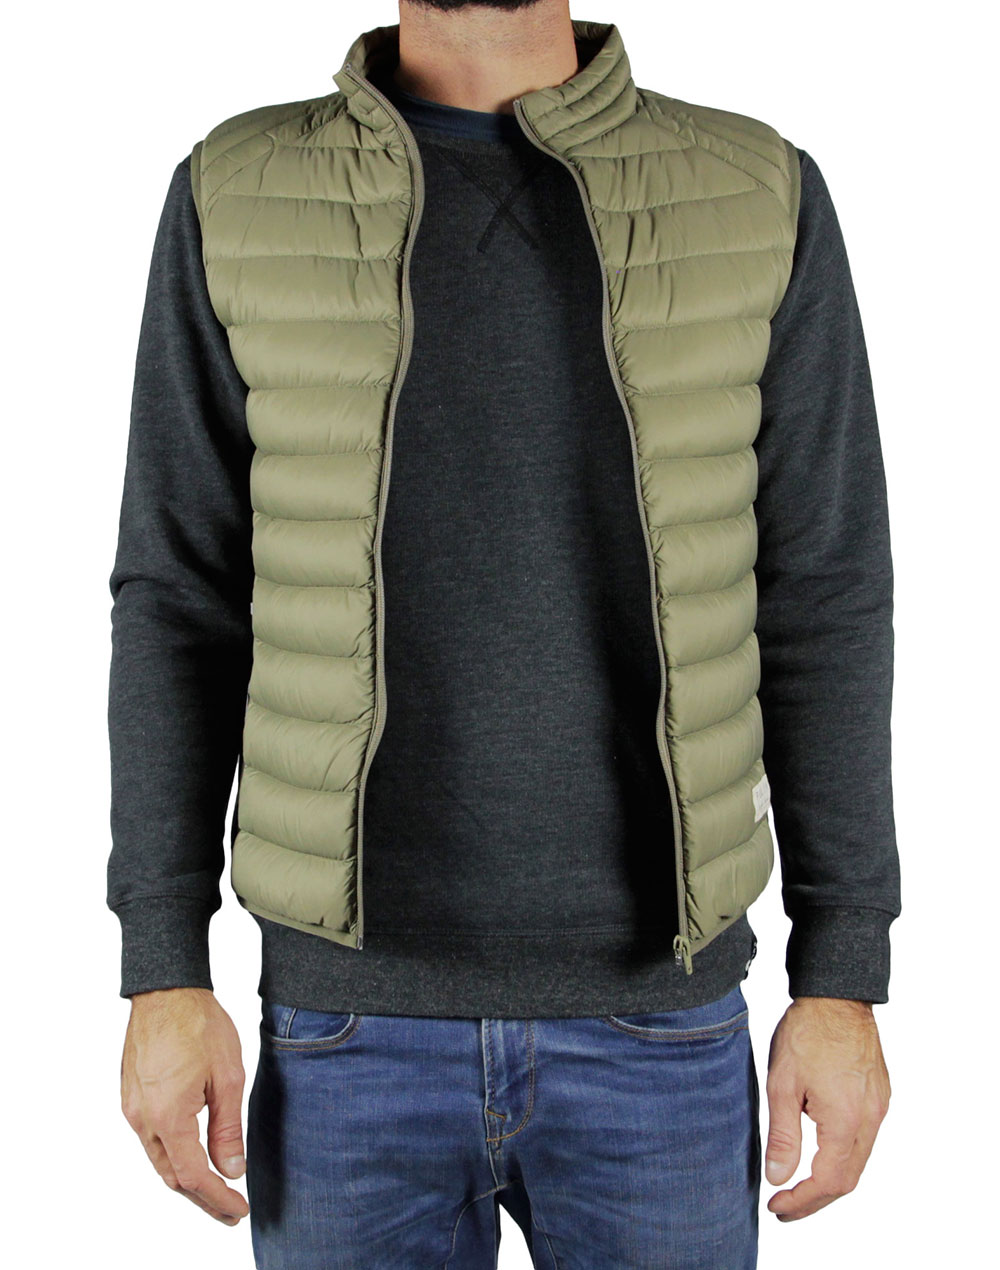 Men's feather jacket without sleeves HOMELAND